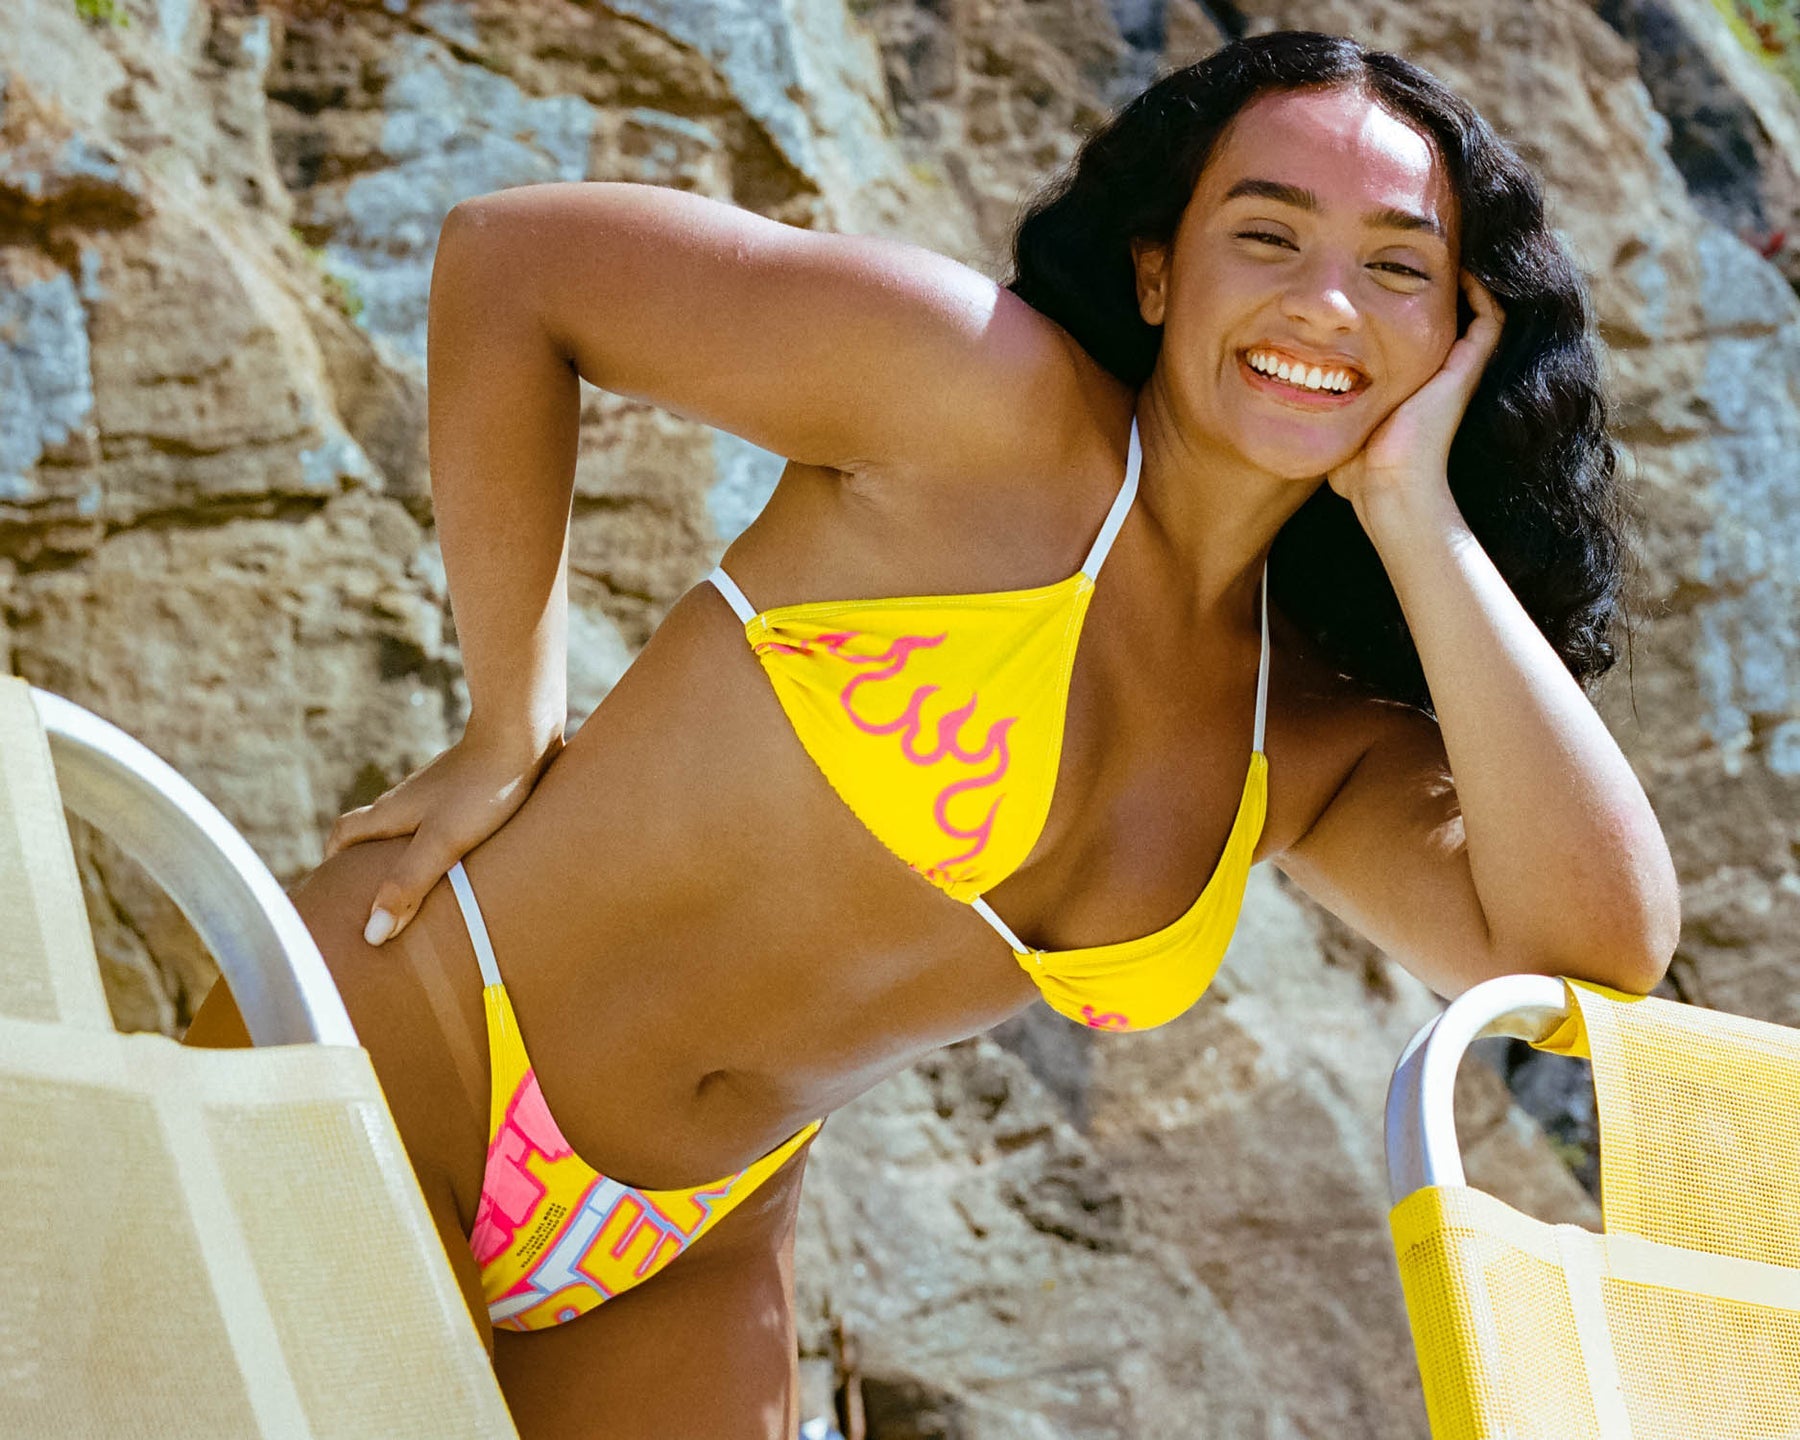 In vibrant nitro yellow, a model dons a bikini featuring the classic SUPER logo. The high-waisted thong design, combined with adjustable sides, makes this swimwear a bold and chic choice for a standout summer bikini look.